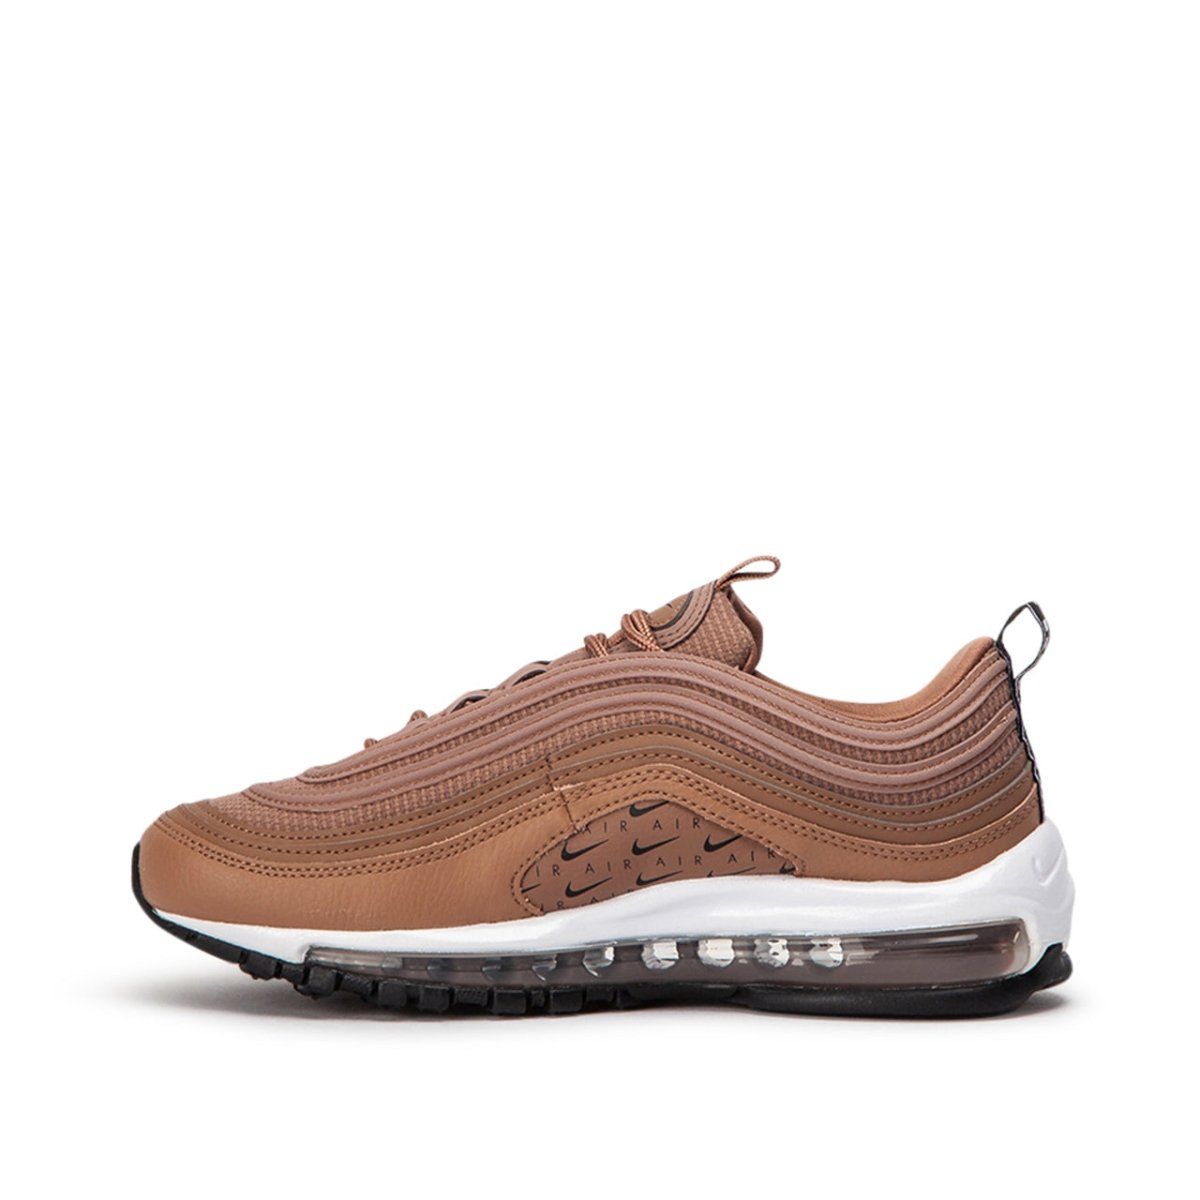 Nike WMNS Air Max 97 Lux (Beige)  - Allike Store